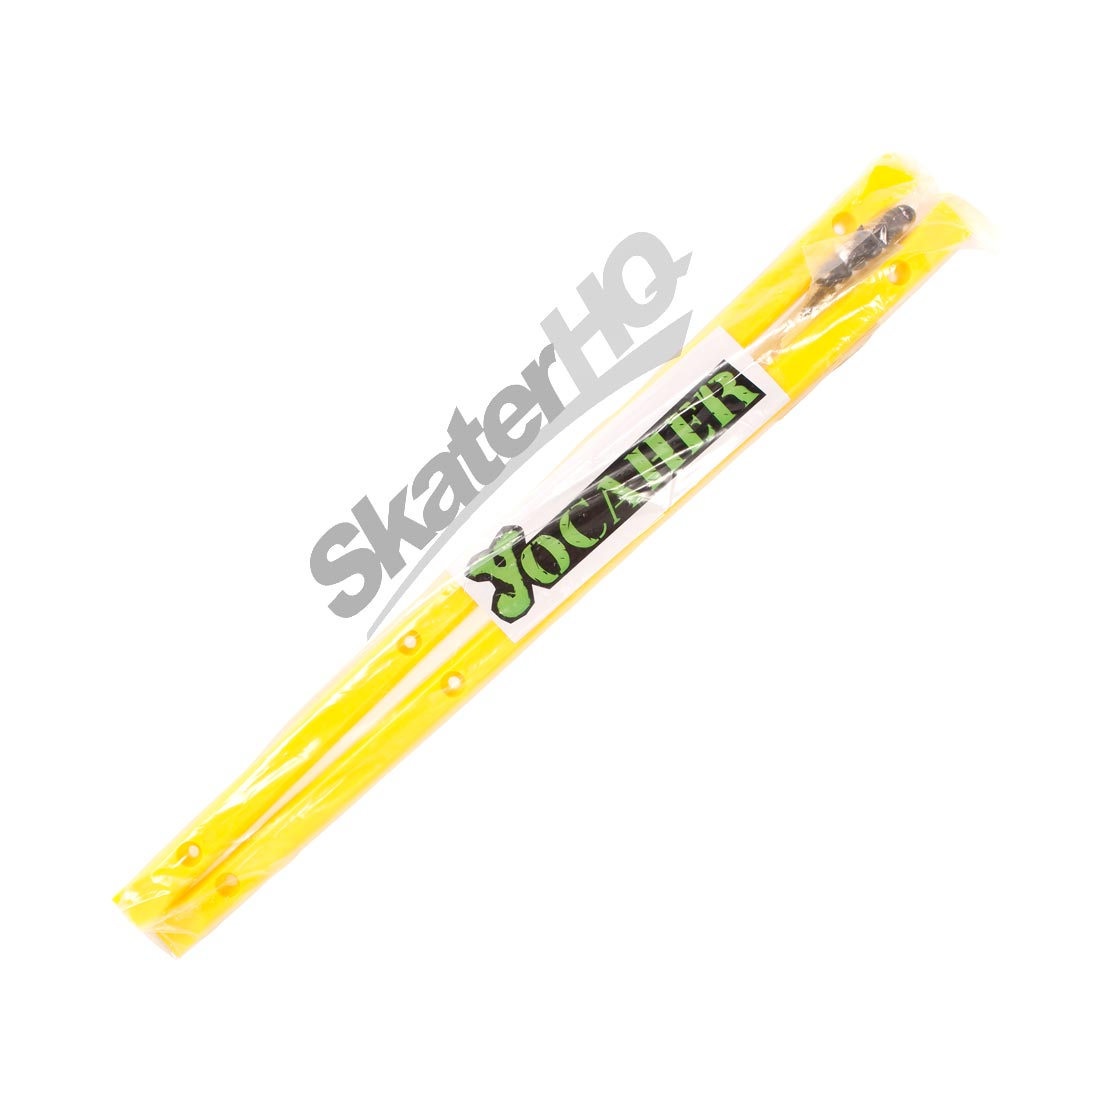 Yocaher Rails - Neon Yellow Skateboard Accessories